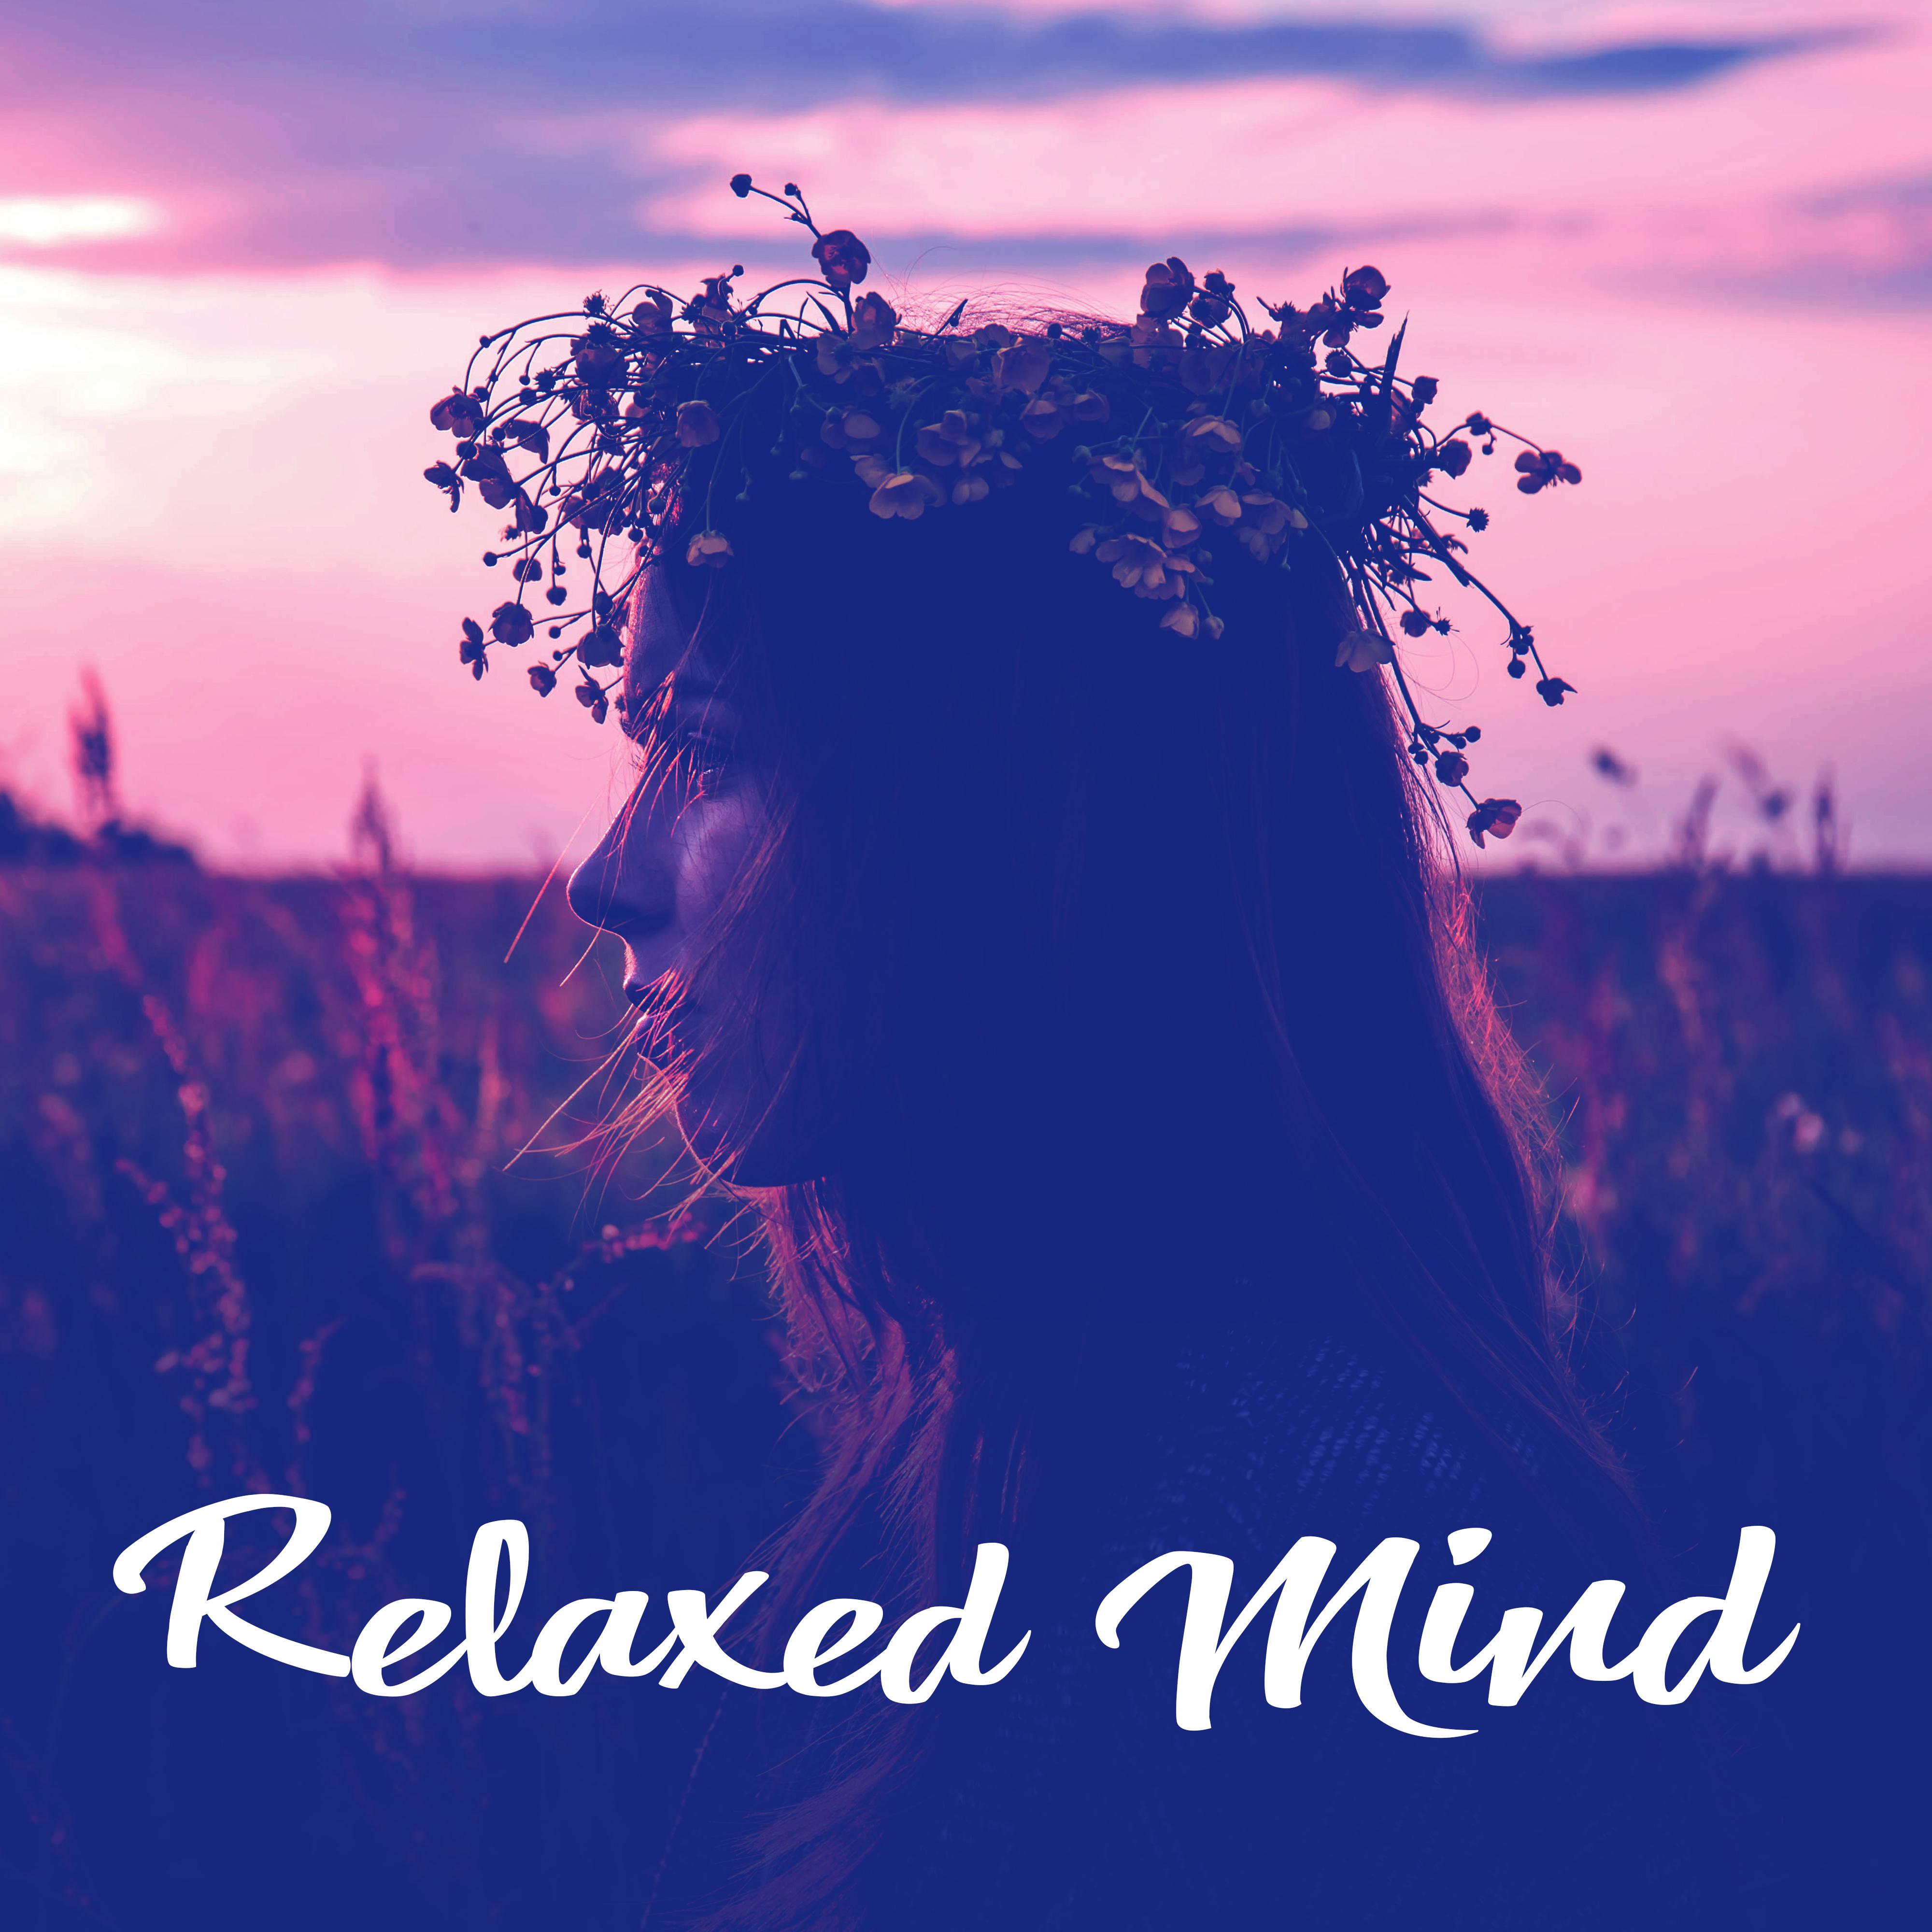 Relaxed Mind – Serenity New Age Songs for Rest, Relaxing Music, Peaceful Nature Sounds